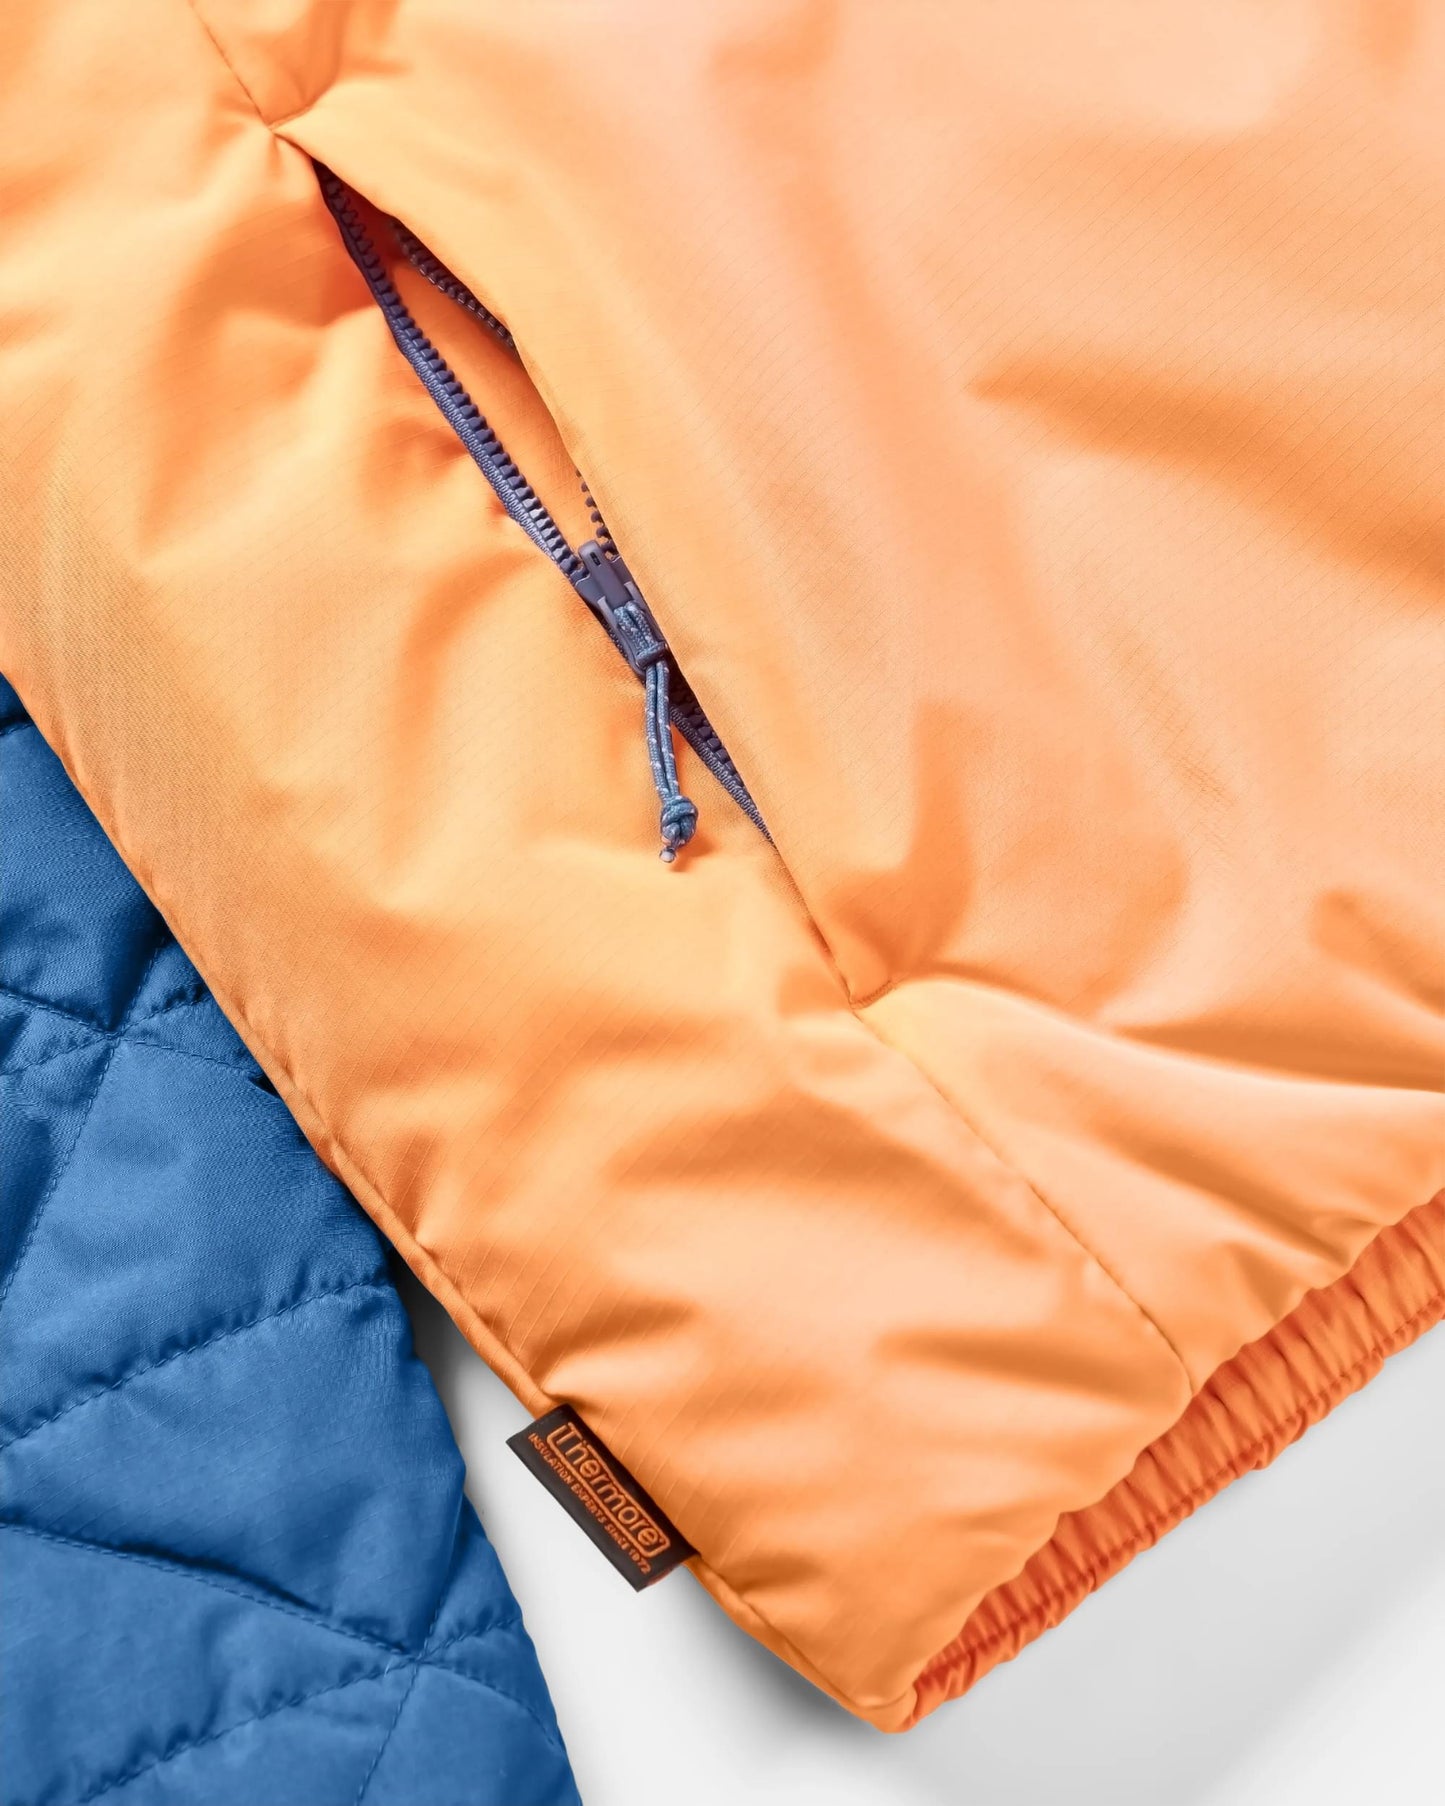 Trace Recycled Thermore® Insulated Jacket - Dark Denim/ Apricot